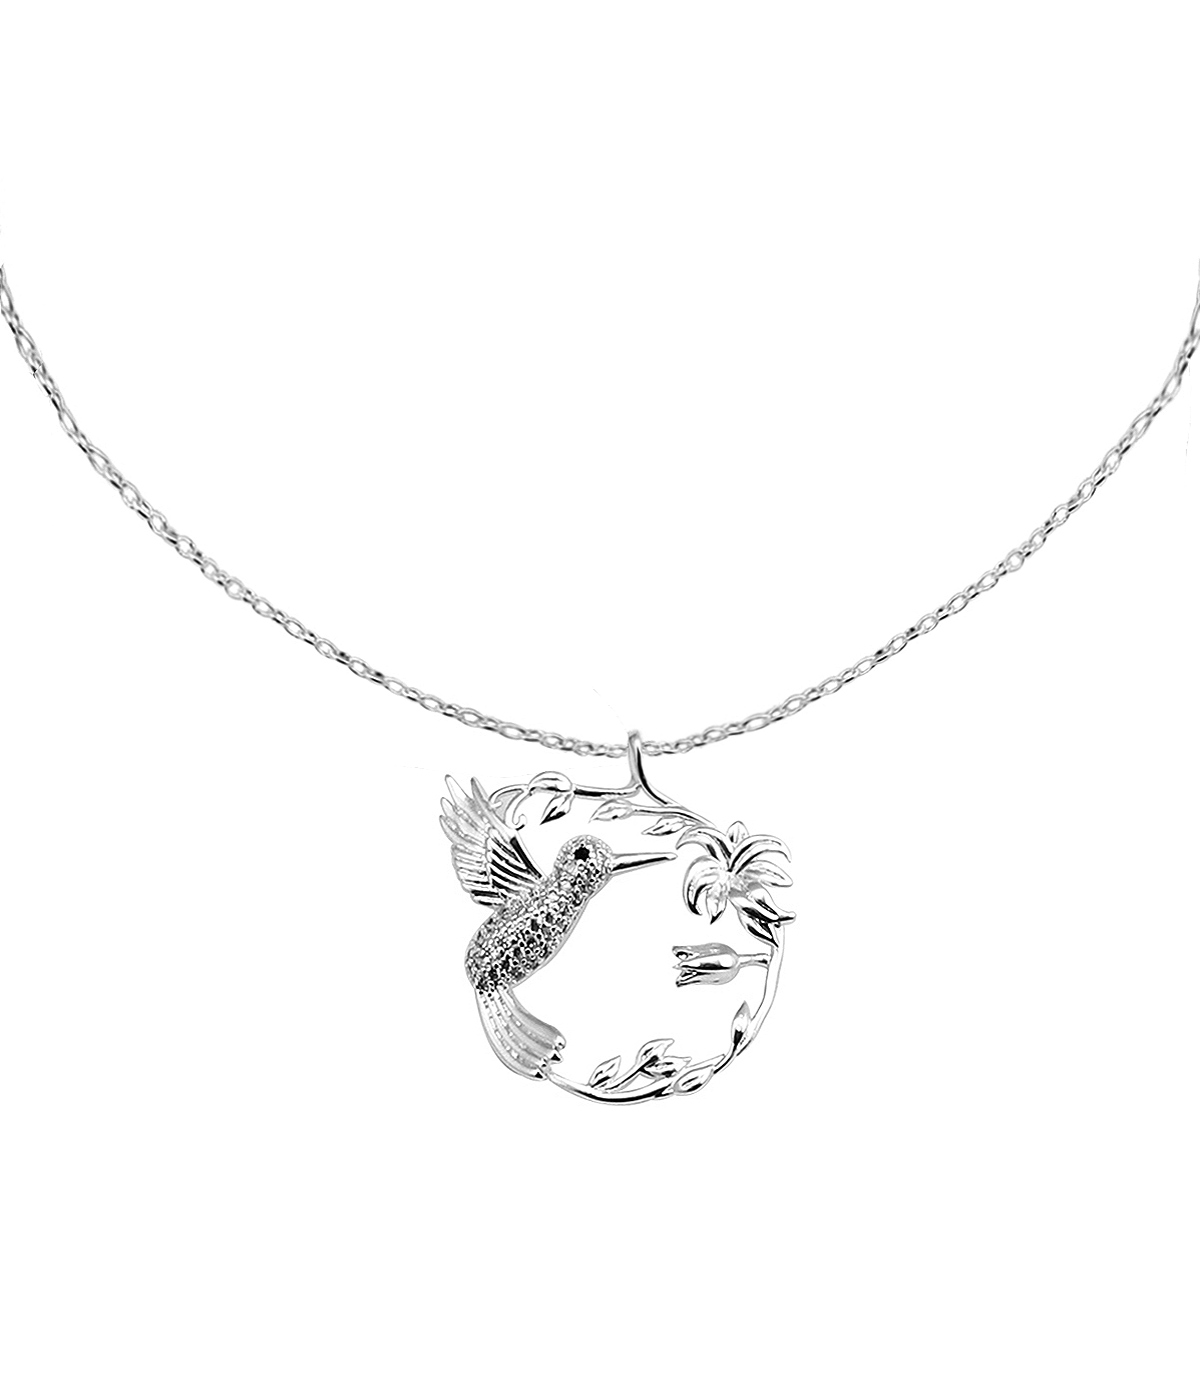 Hummingbird Pendant Necklace by Vernon Wilson of Panama Bay Jewelers -latest NECKLACE,Layer Sets design 2021